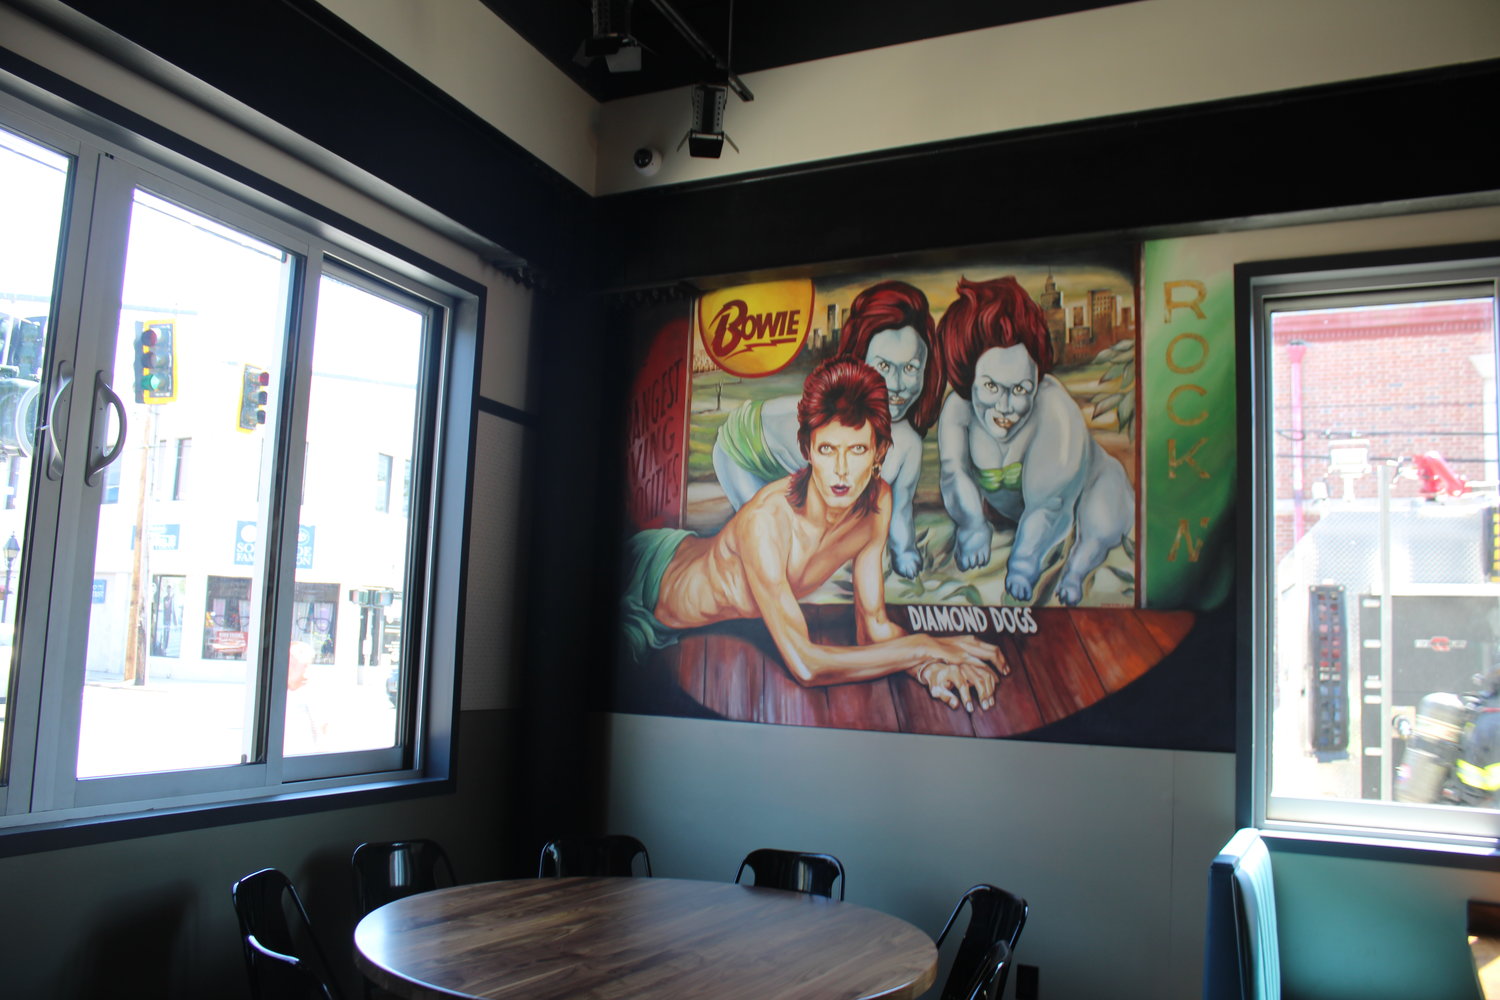 A mural inspired by the cover art for David Bowie’s 1974 album, “Diamond Dogs.”